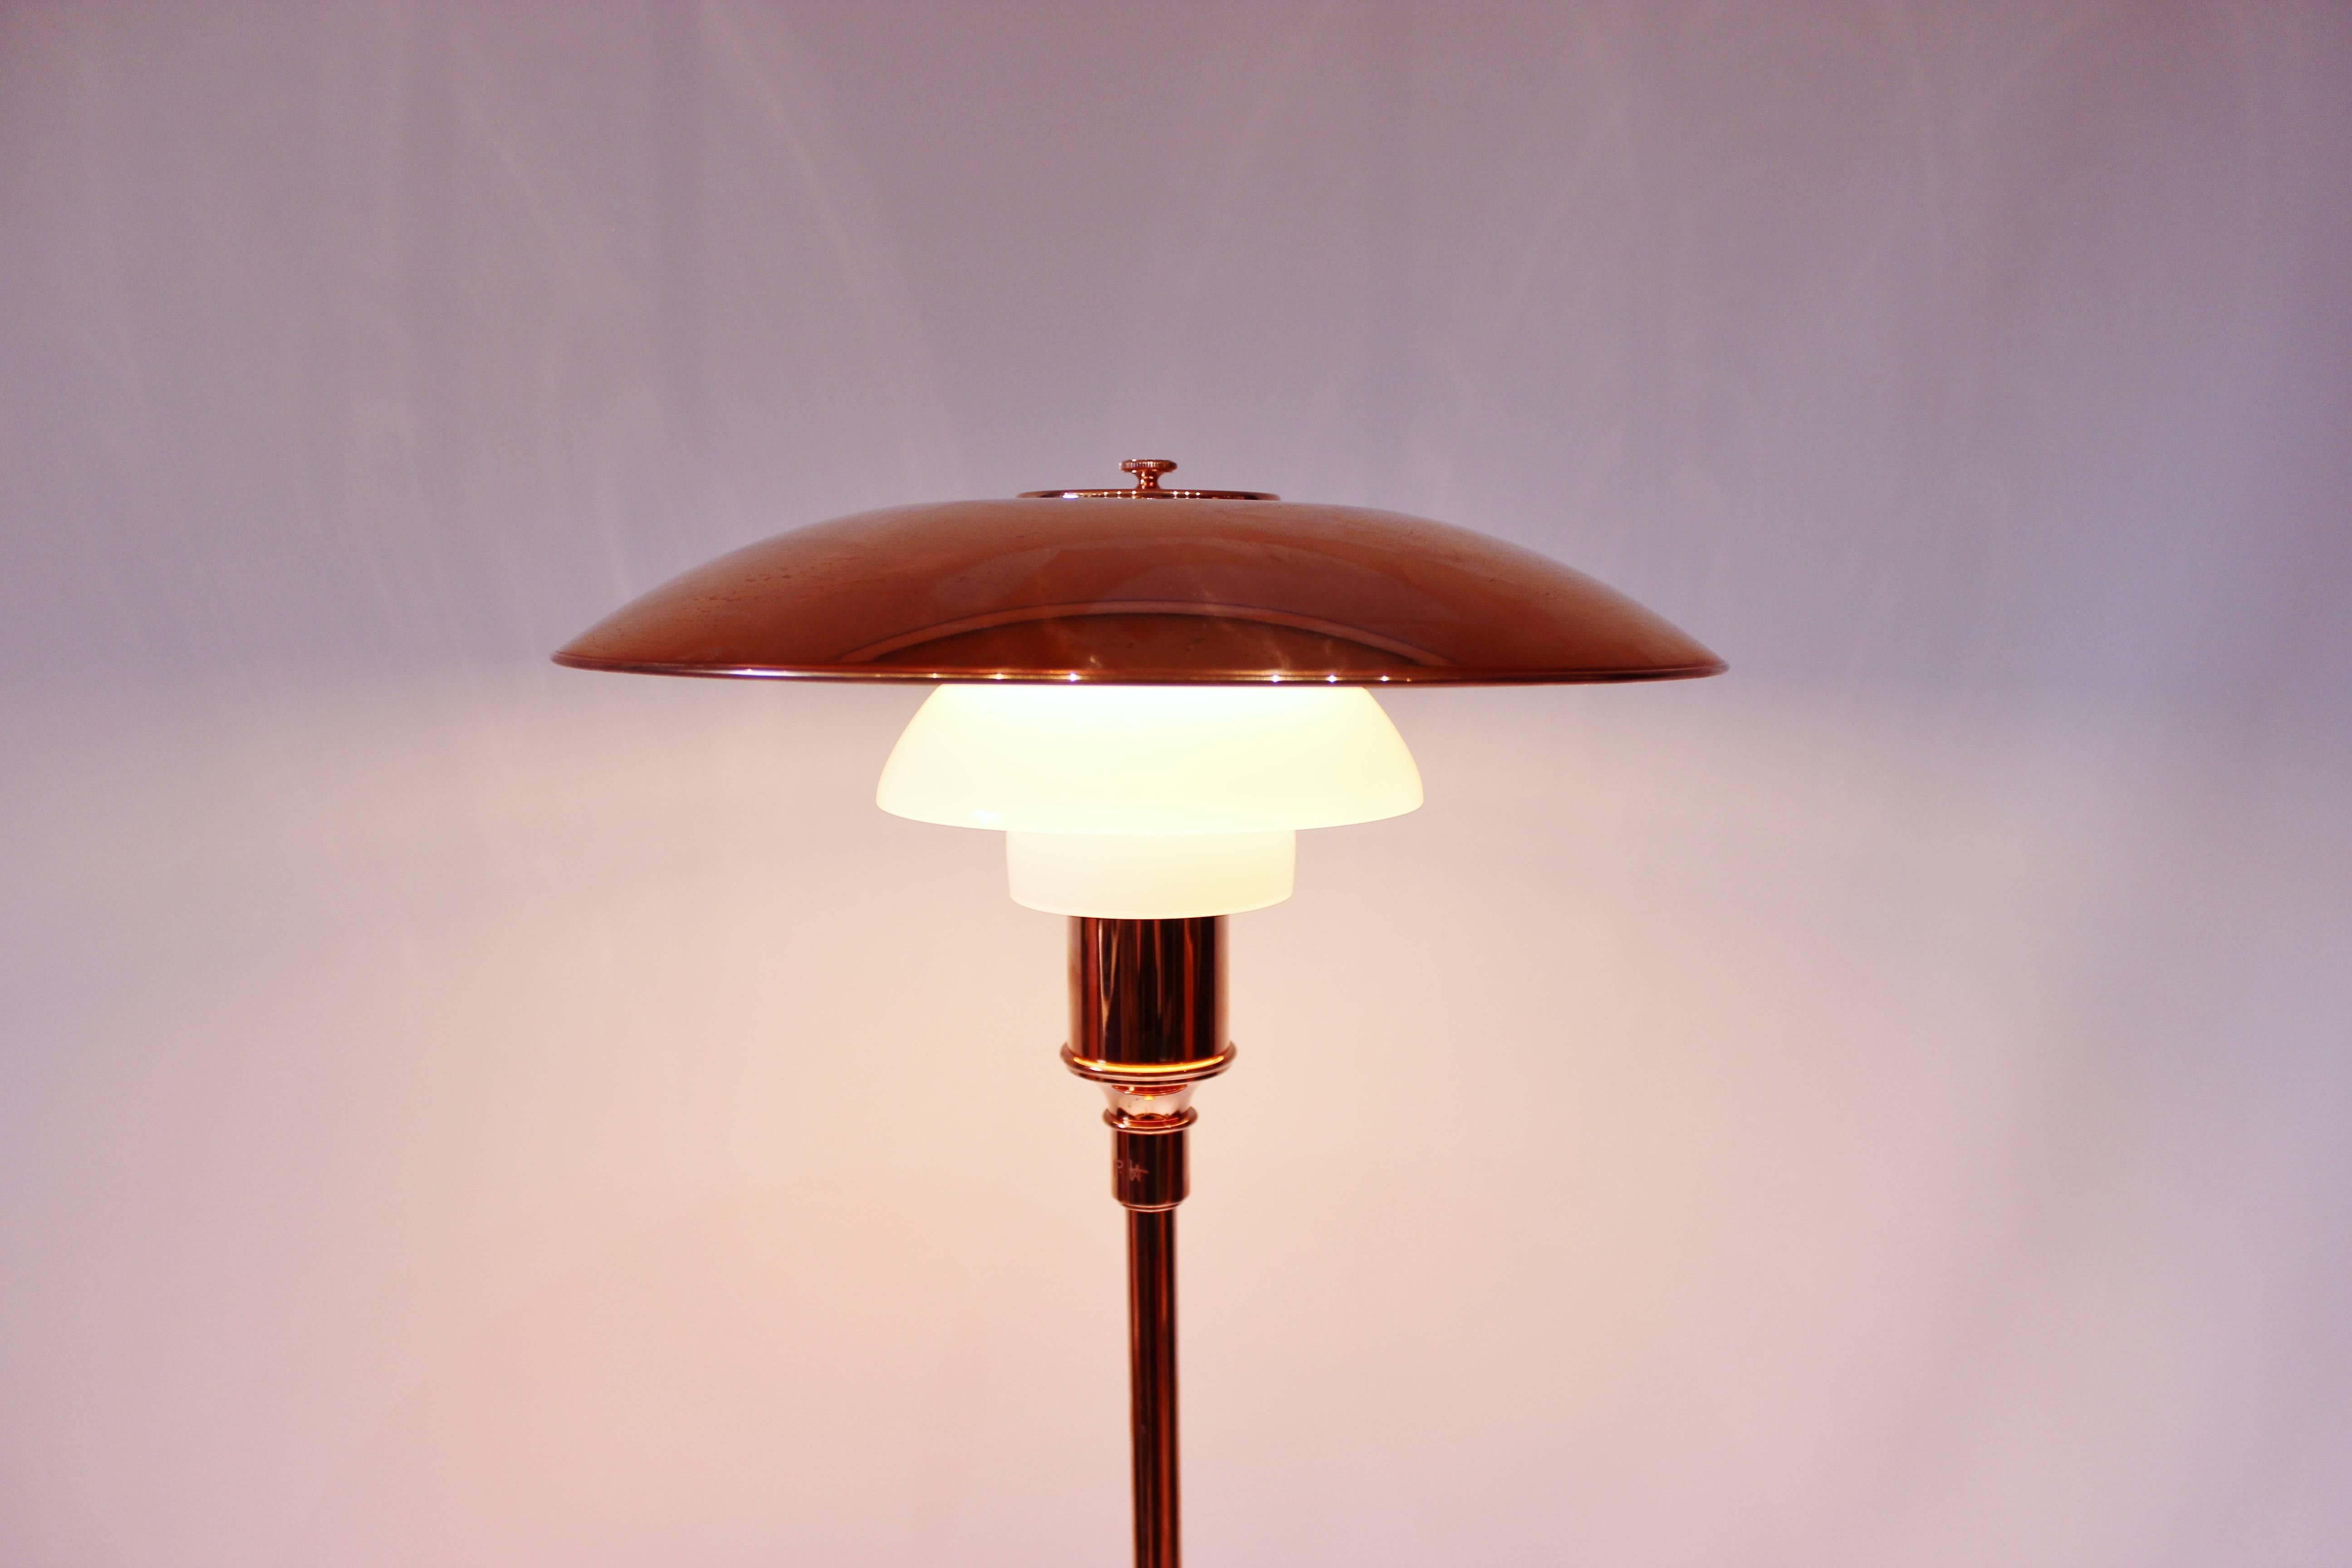 PH3½-2½, limited edition, copper floor lamp by Poul Henningsen and Louis Poulsen. The lamp has the larger shade in copper and is of great vintage condition.

Louis Poulsen celebrated 90th anniversary of PH's pioneering three-shade system with launch